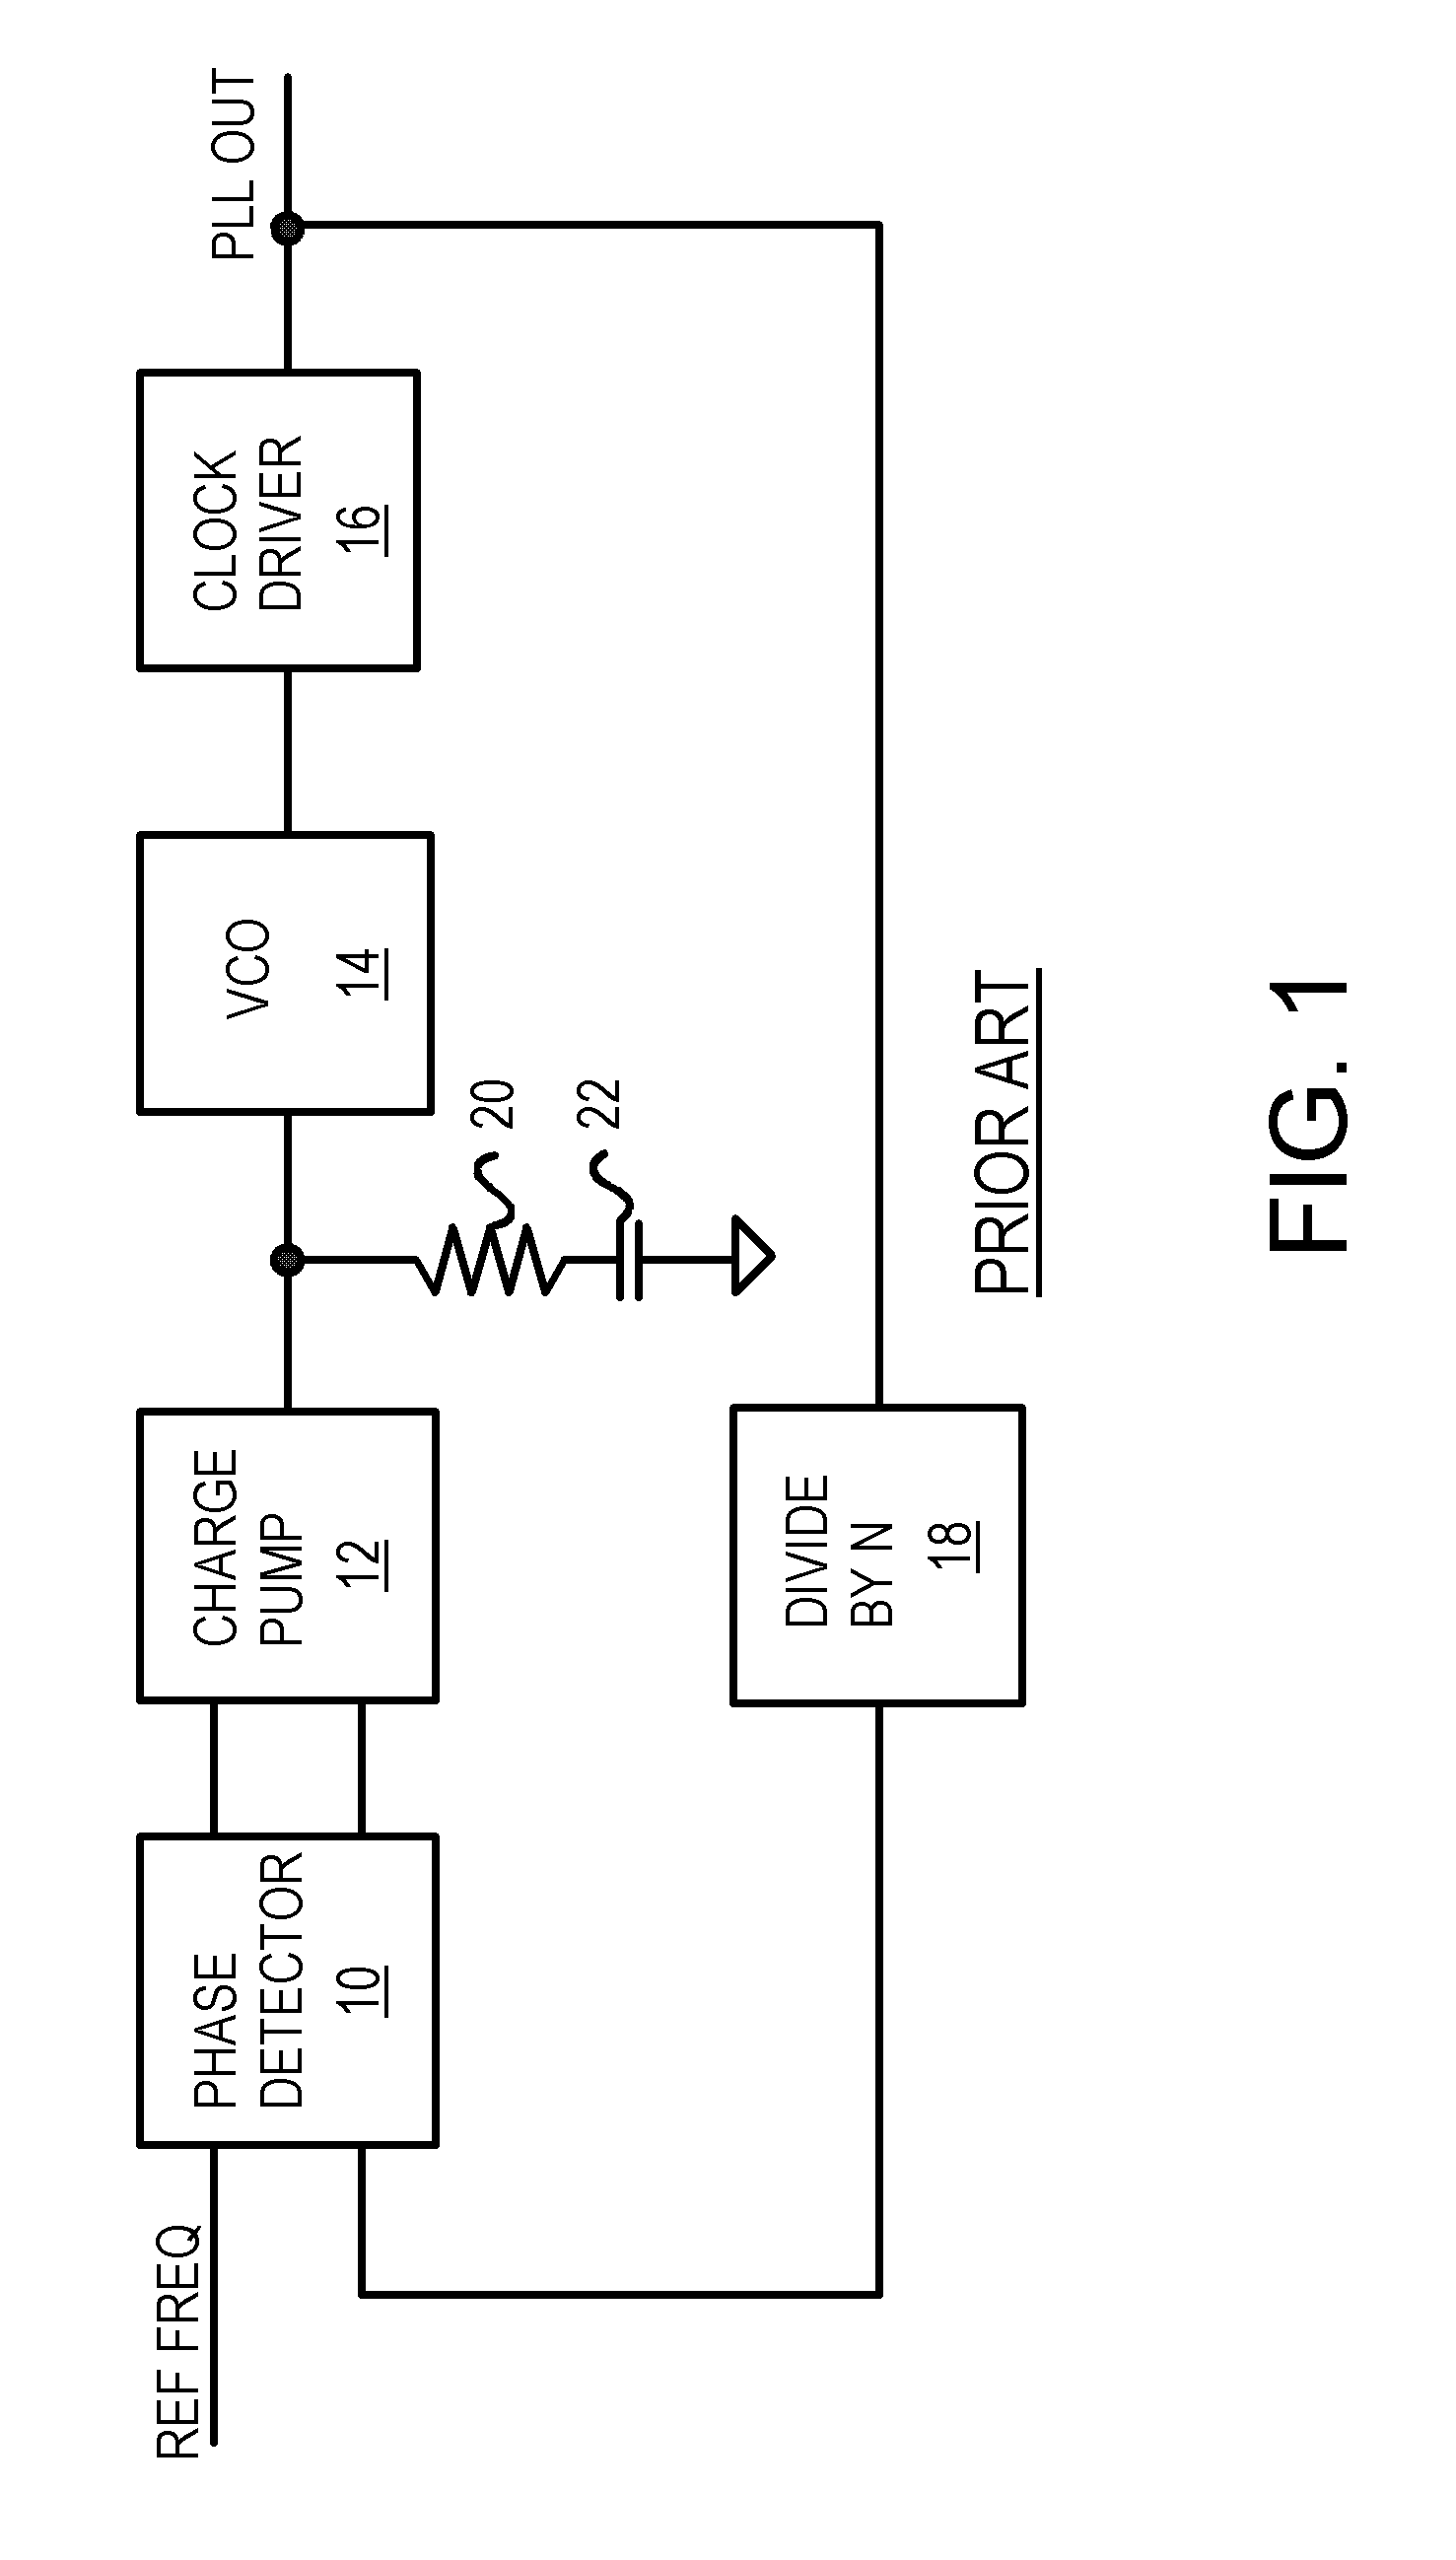 CMOS voltage-controlled oscillator (VCO) with a current-adaptive resistor for improved linearity